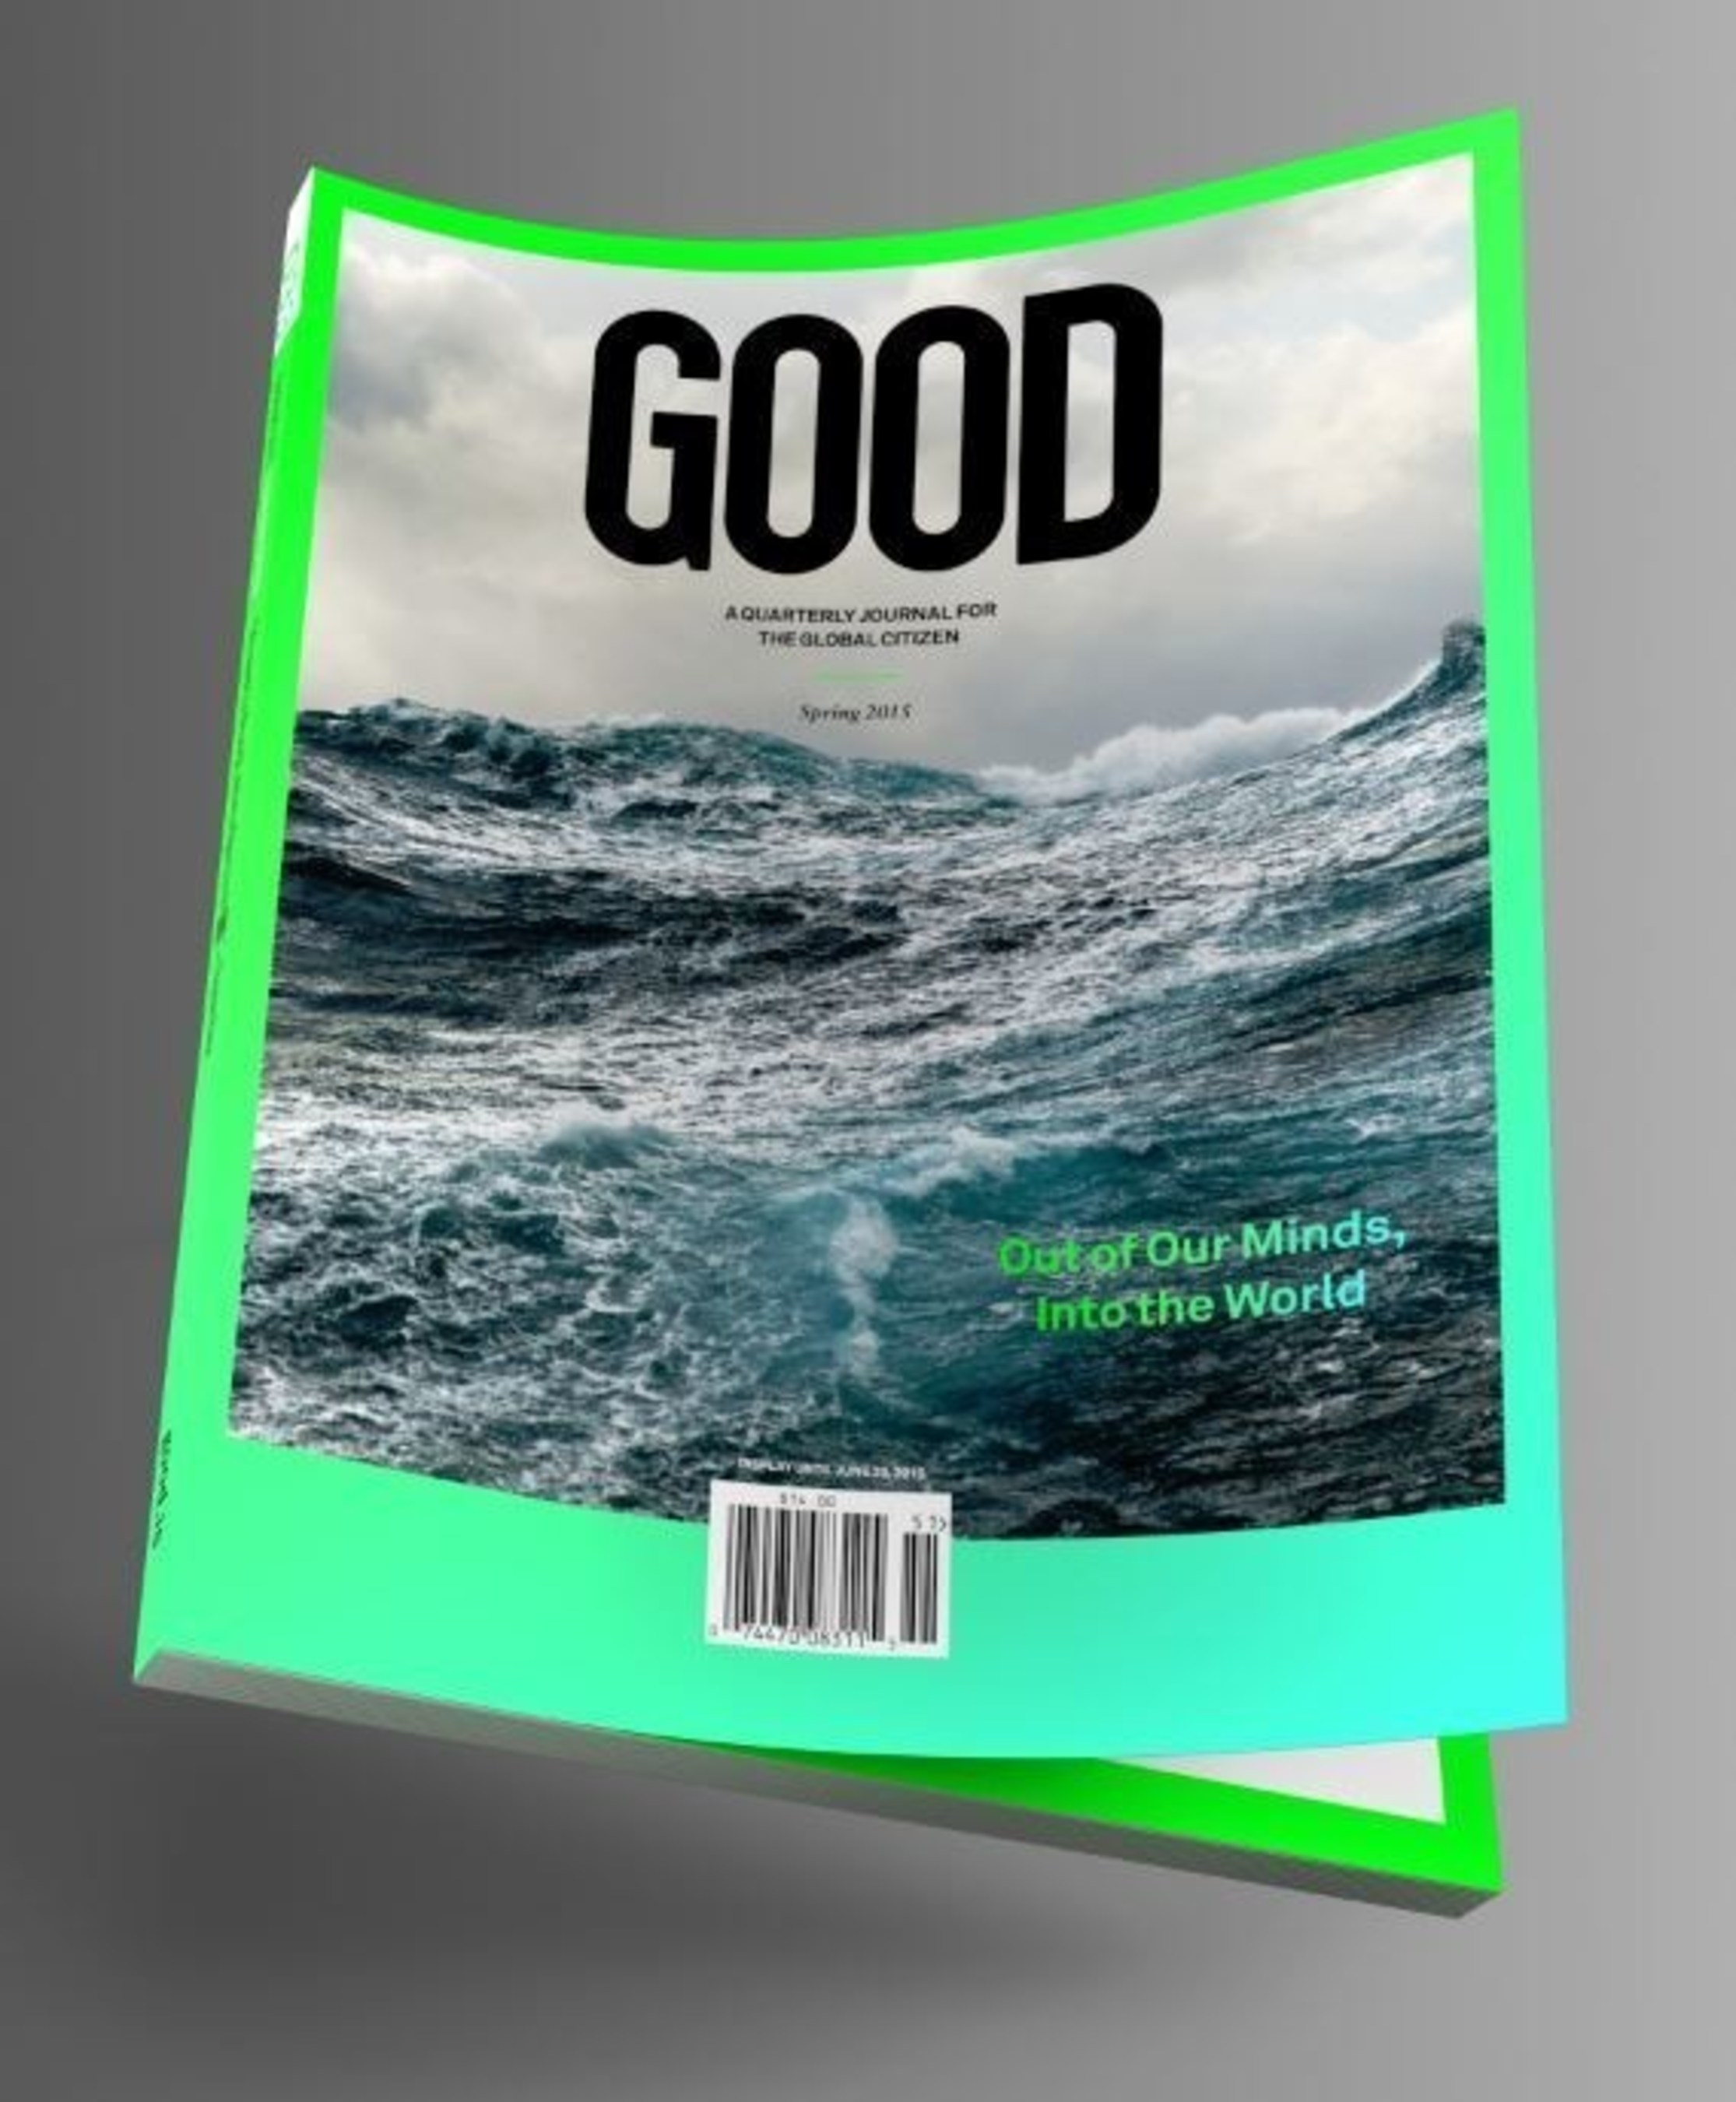 GOOD magazine re-launches as a quarterly print journal for the globally minded citizen. The Spring 2015 issue is now available at select Barnes & Noble stores, Hudson Booksellers and Whole Foods.